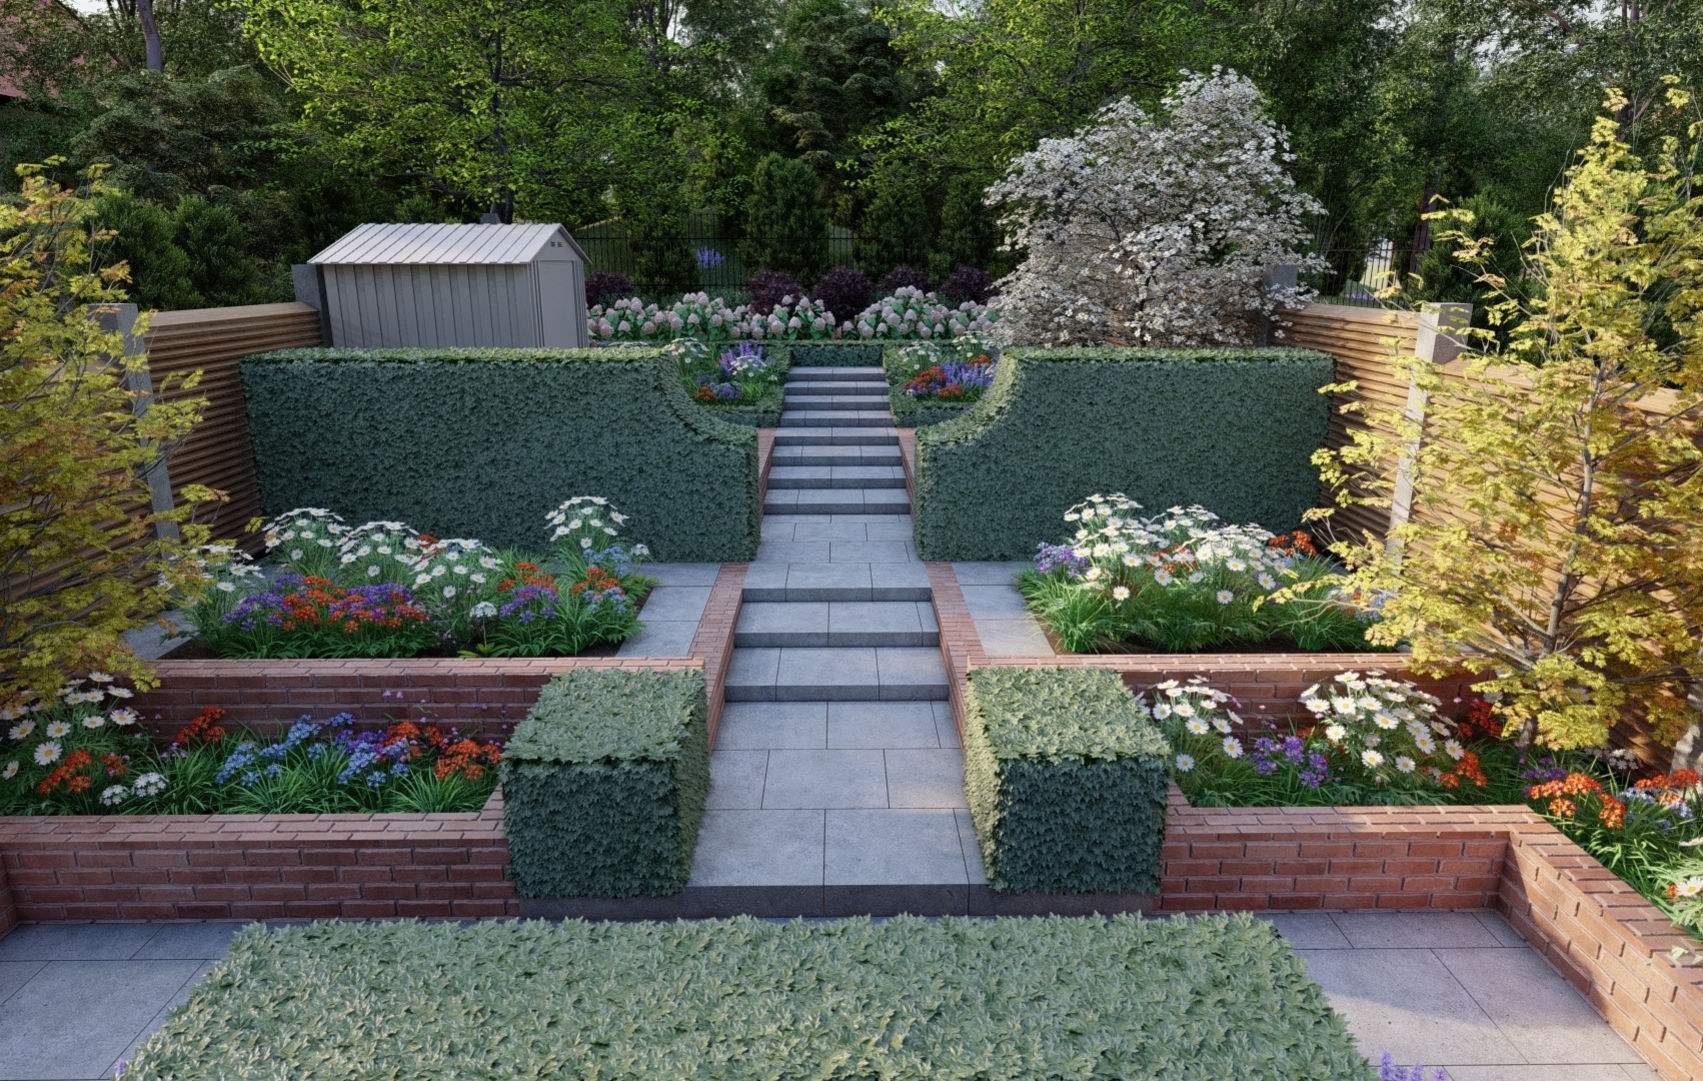 Garden Design Rathfarnham | a clever terraced layout providing easy access to beautiful planting schemes